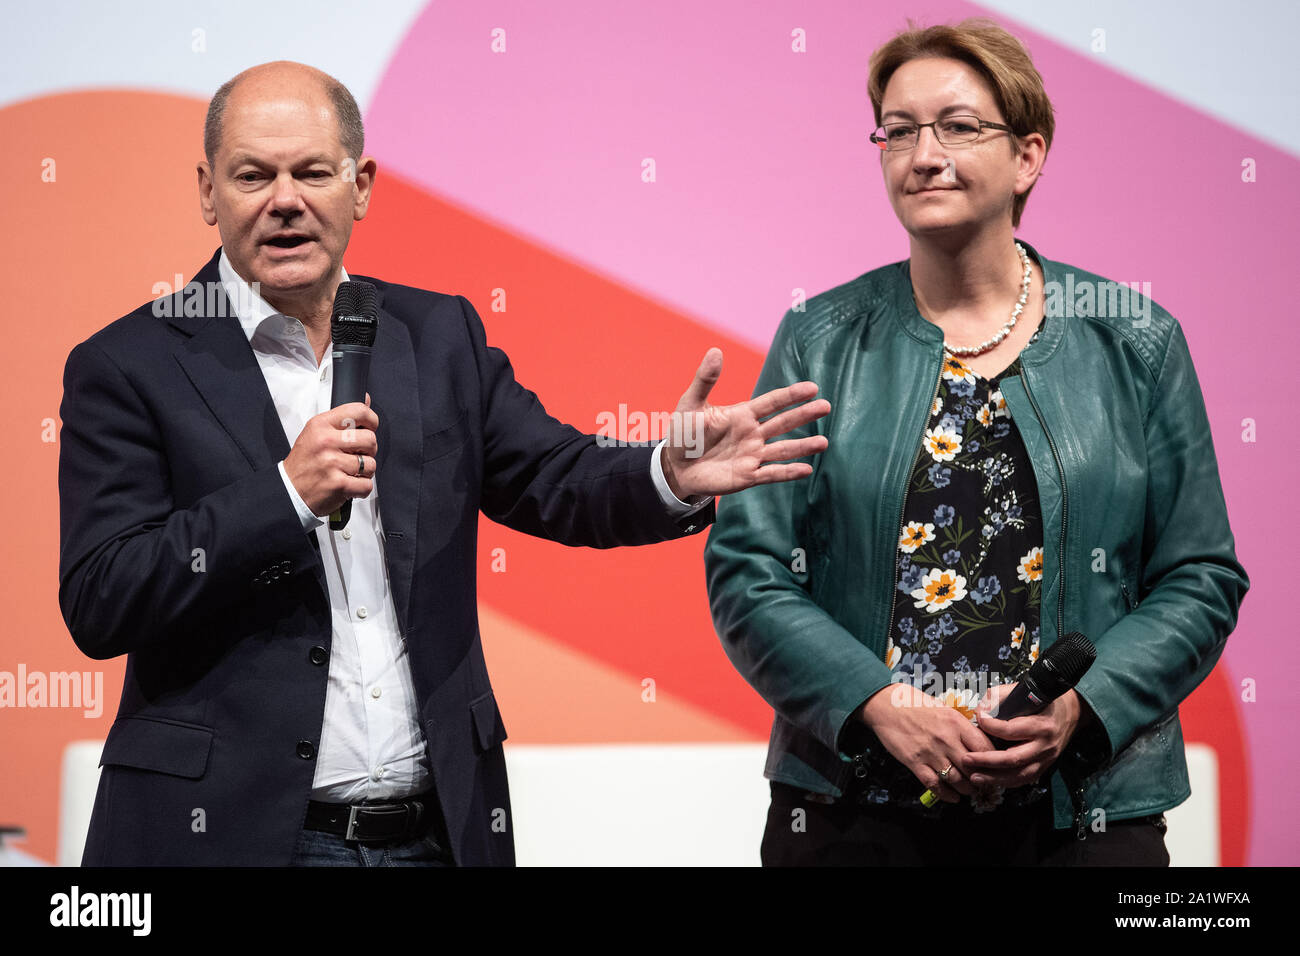 Troisdorf, Germany. 29th Sep, 2019. Olaf Scholz (l) and Klara Geywitz are on stage at the SPD regional conference to present the candidates for party chairmanship. Credit: Marius Becker/dpa/Alamy Live News Stock Photo